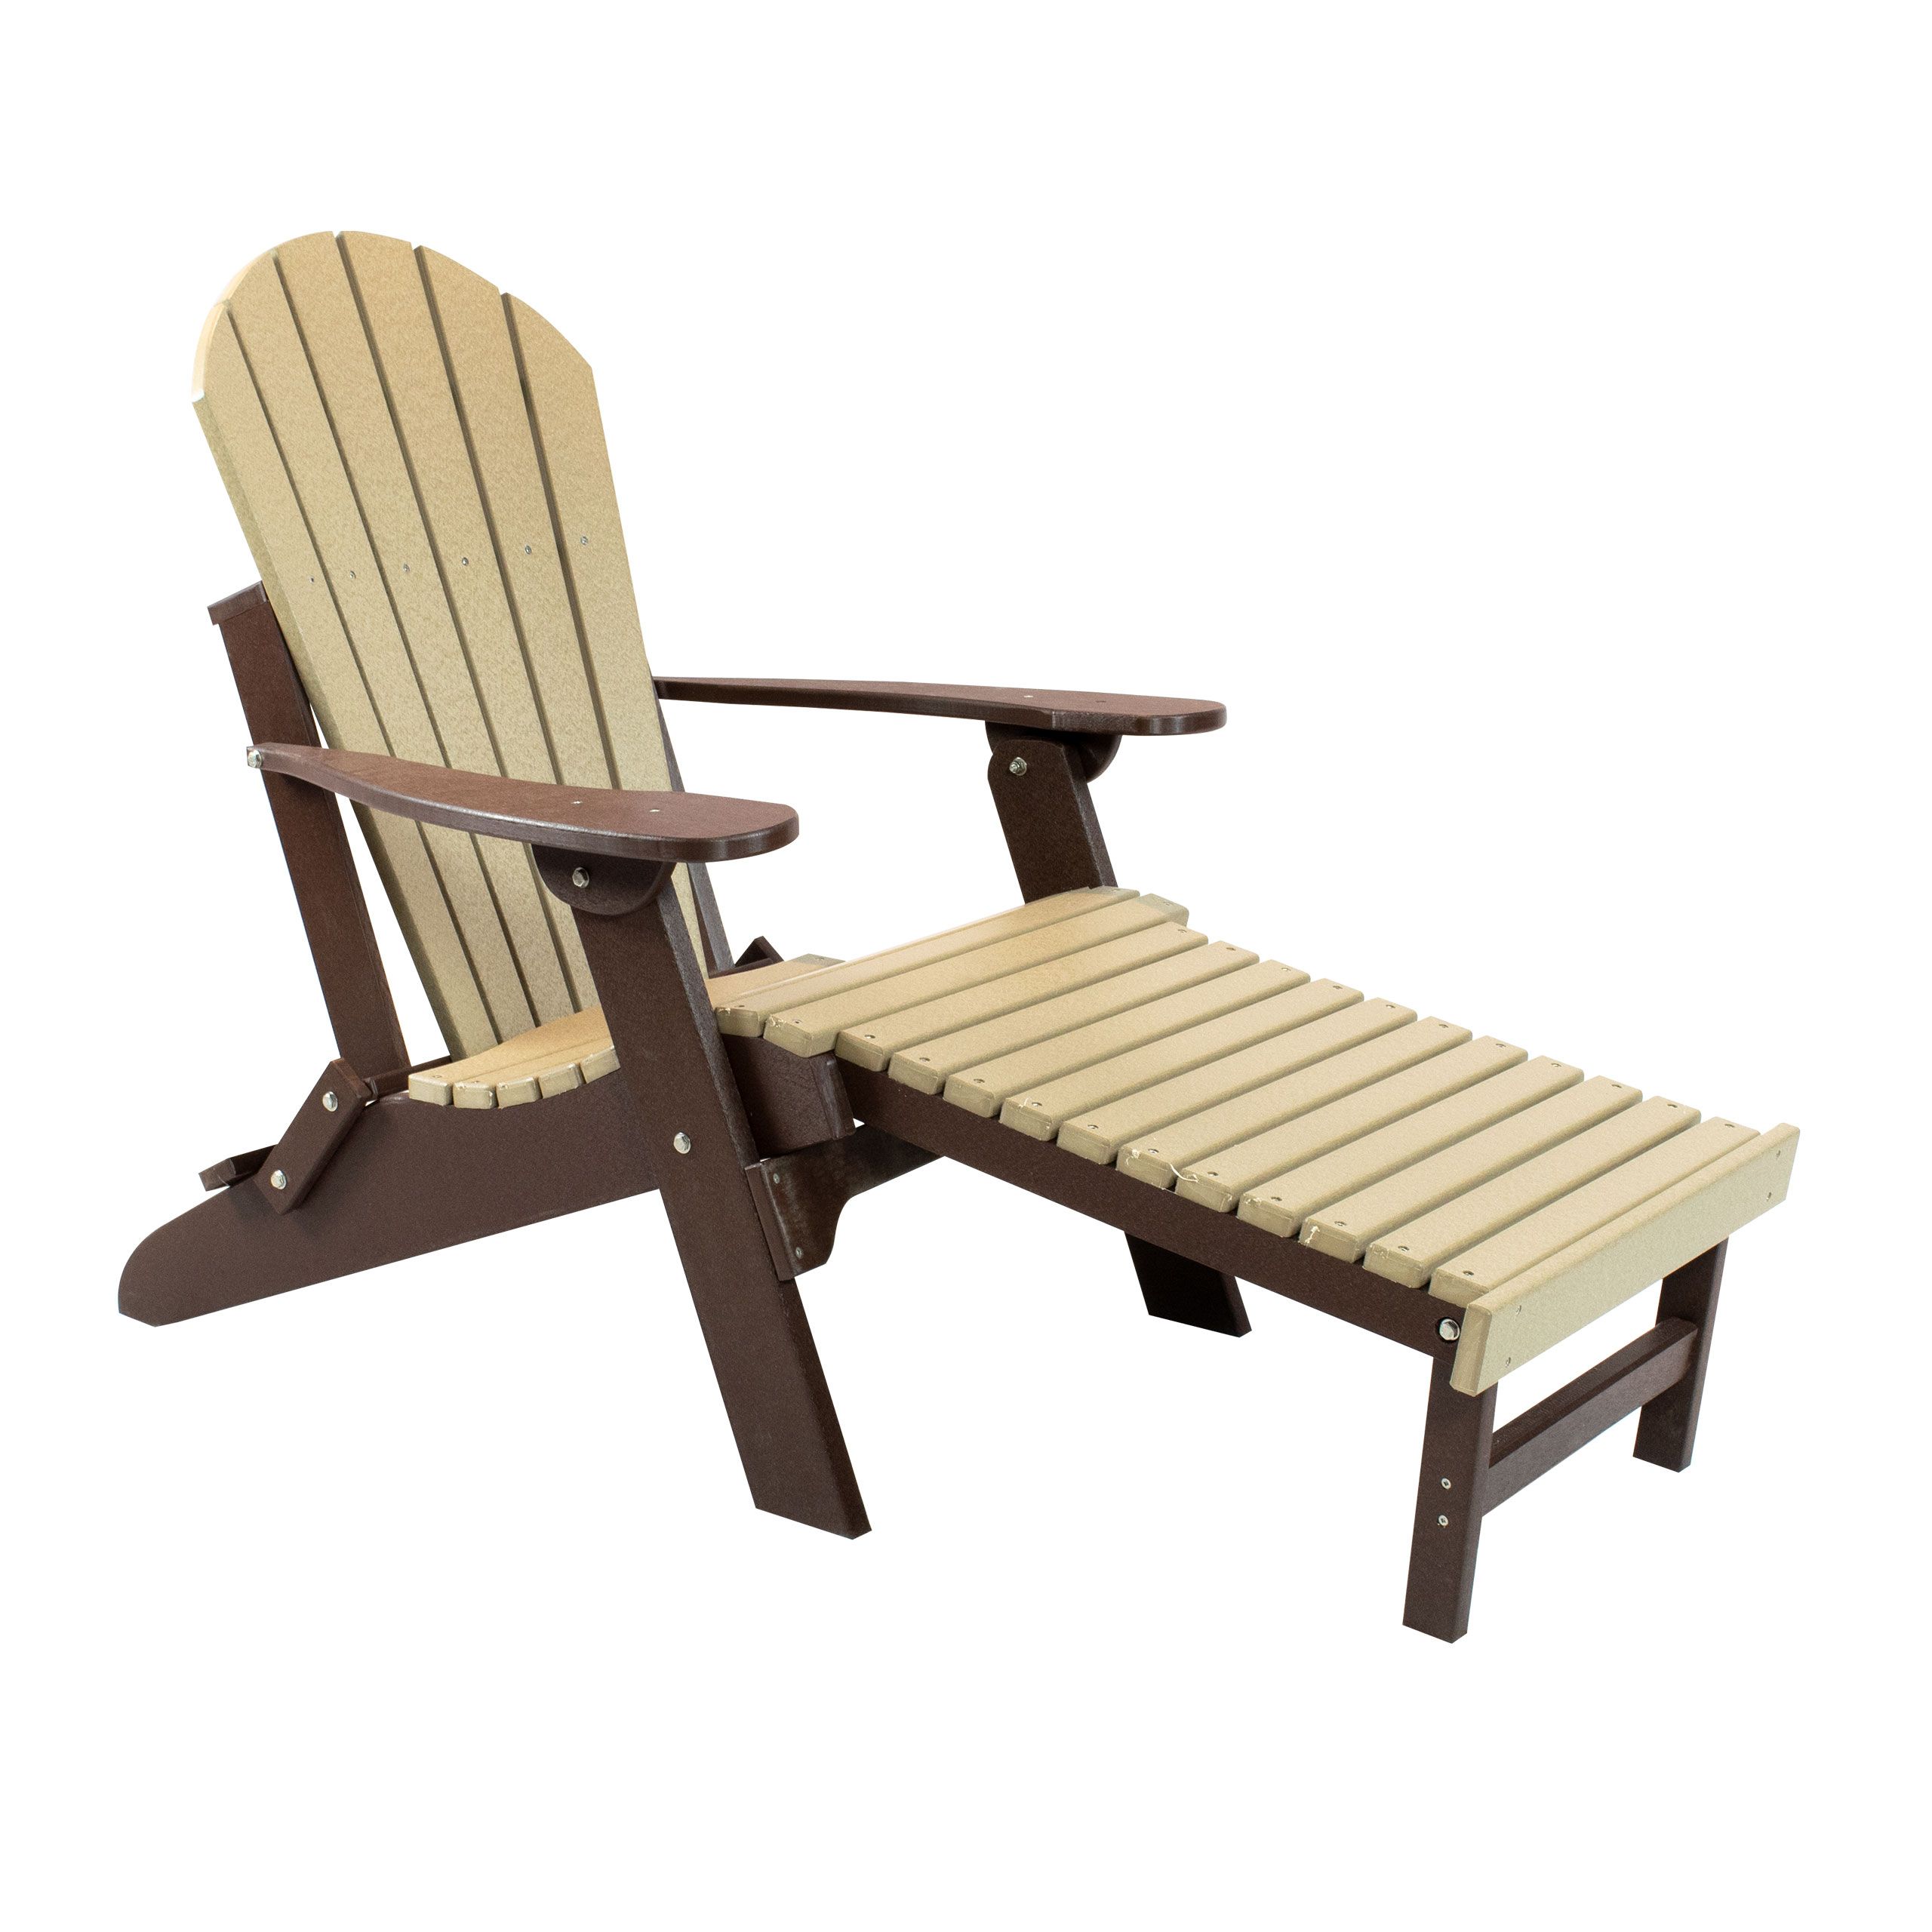 Fashionable Handmade White Folding Adirondack Pull Out Footrest Chairs Throughout Folding Adirondack Chair W/pullout Ottoman (View 2 of 25)